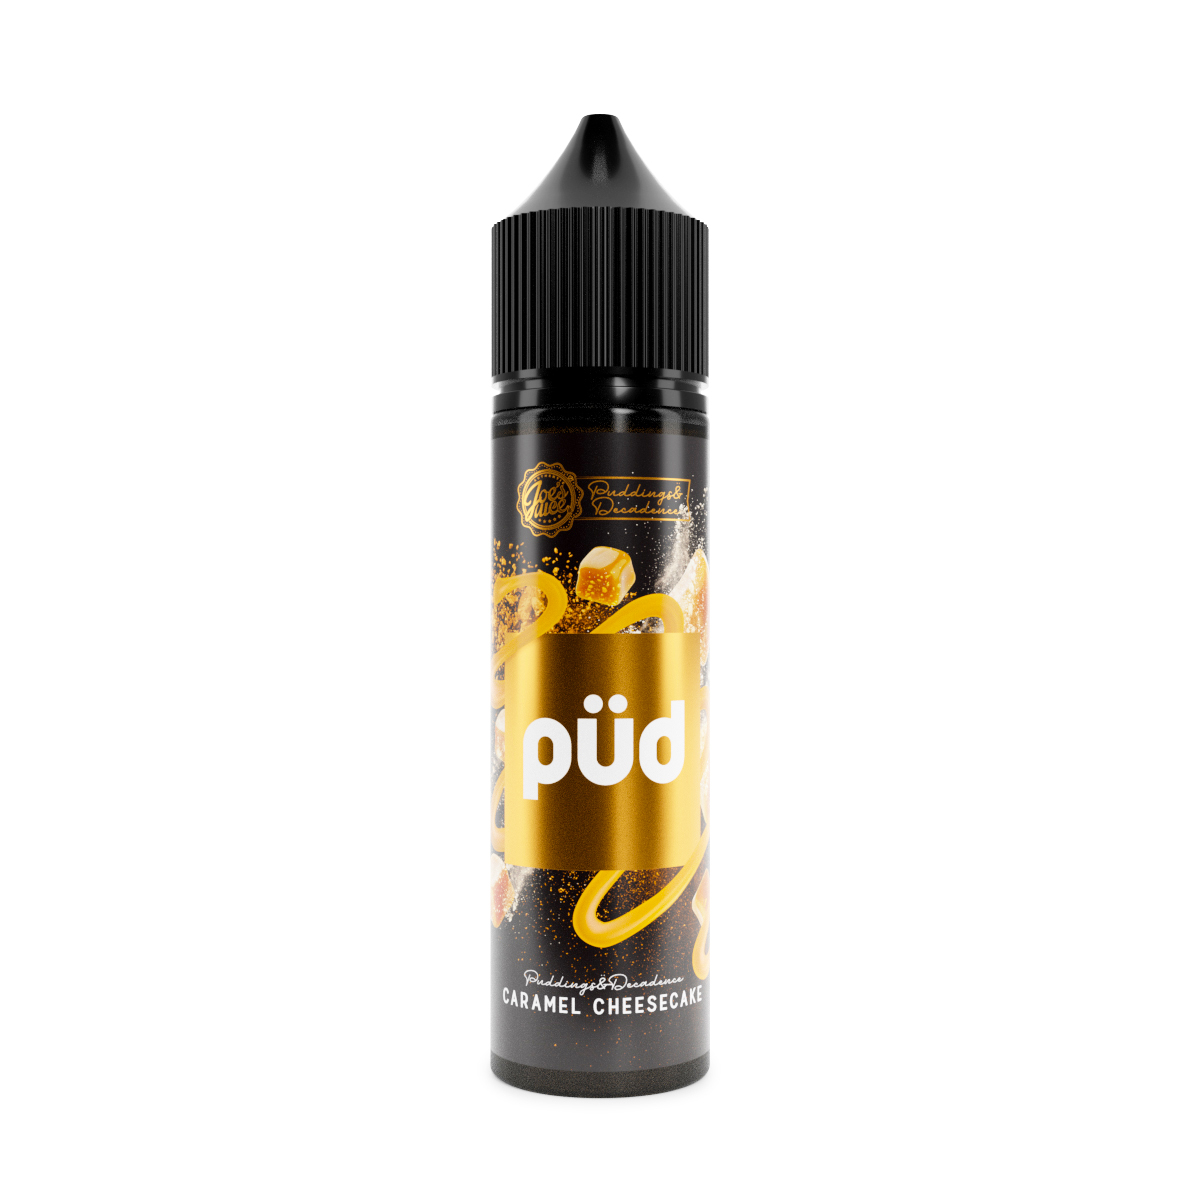 PUD - Caramel Cheesecake Flavour Concentrate by Joe's Juice